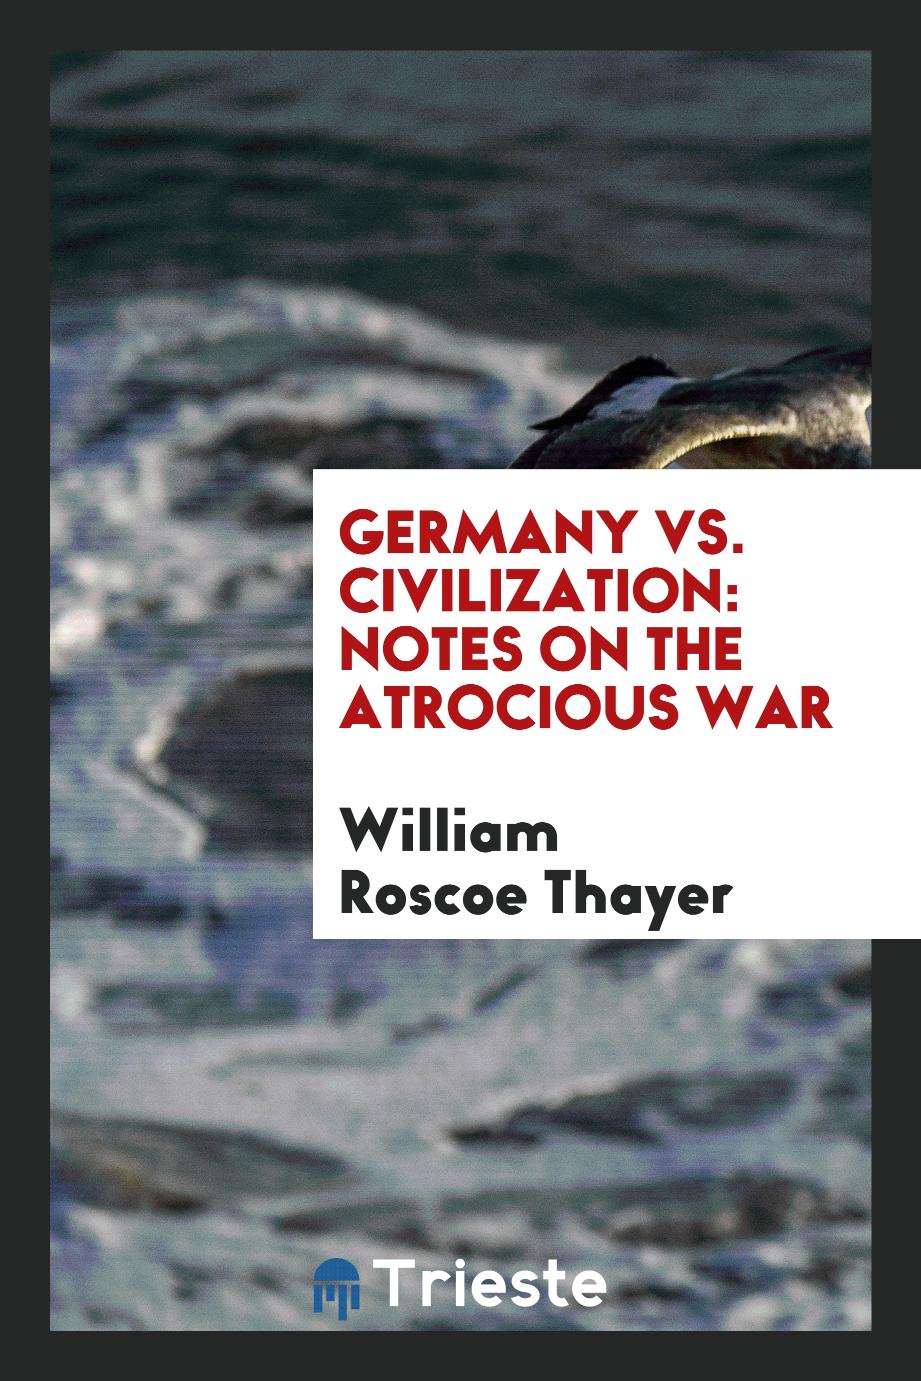 Germany Vs. Civilization: Notes on the Atrocious War